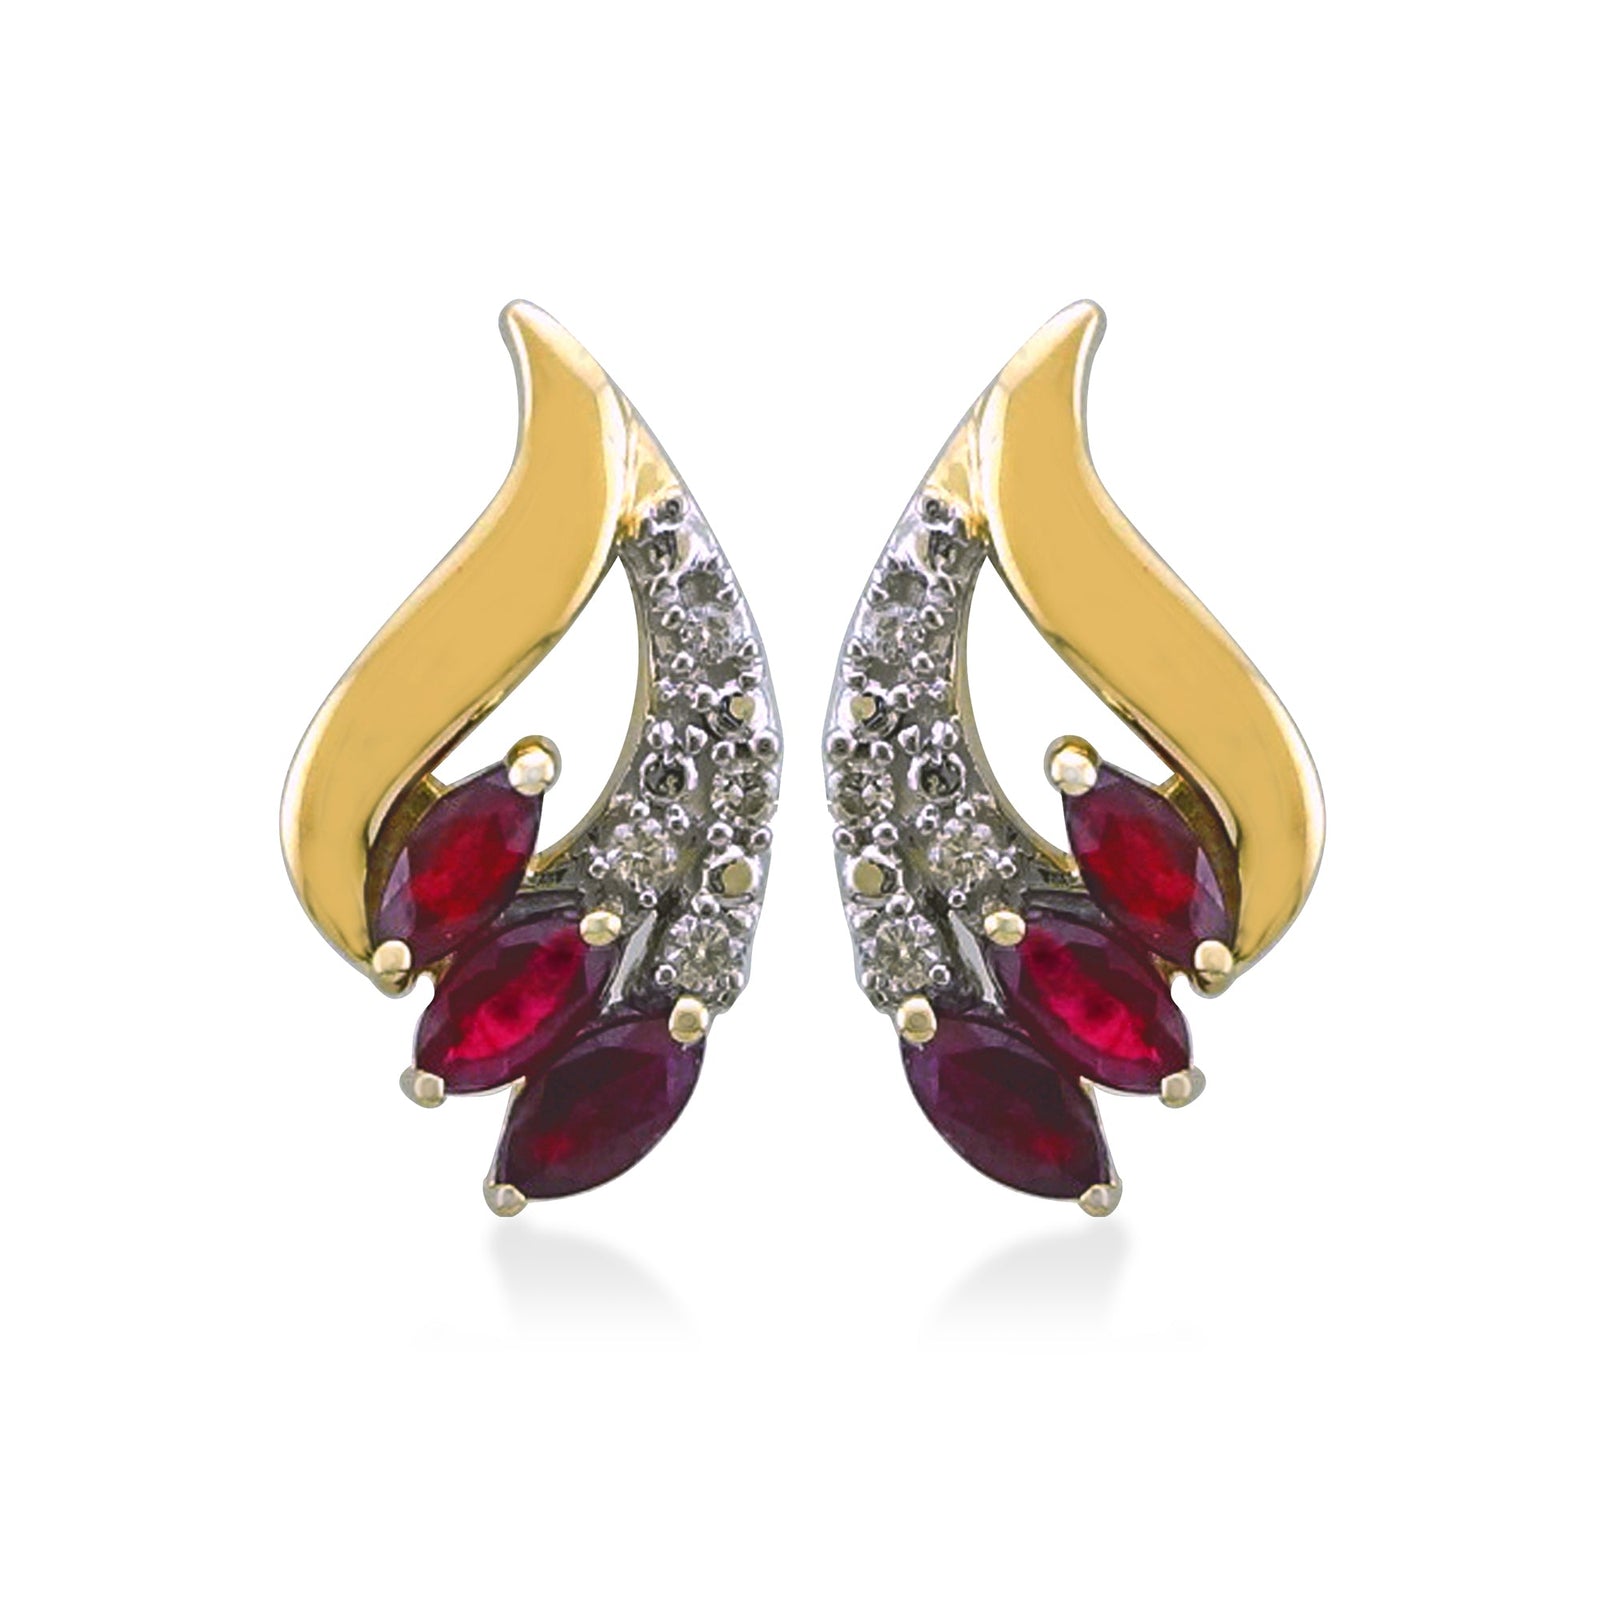 9ct gold marquise shape ruby & diamond stud earrings 0.06ct (product width 8mm)